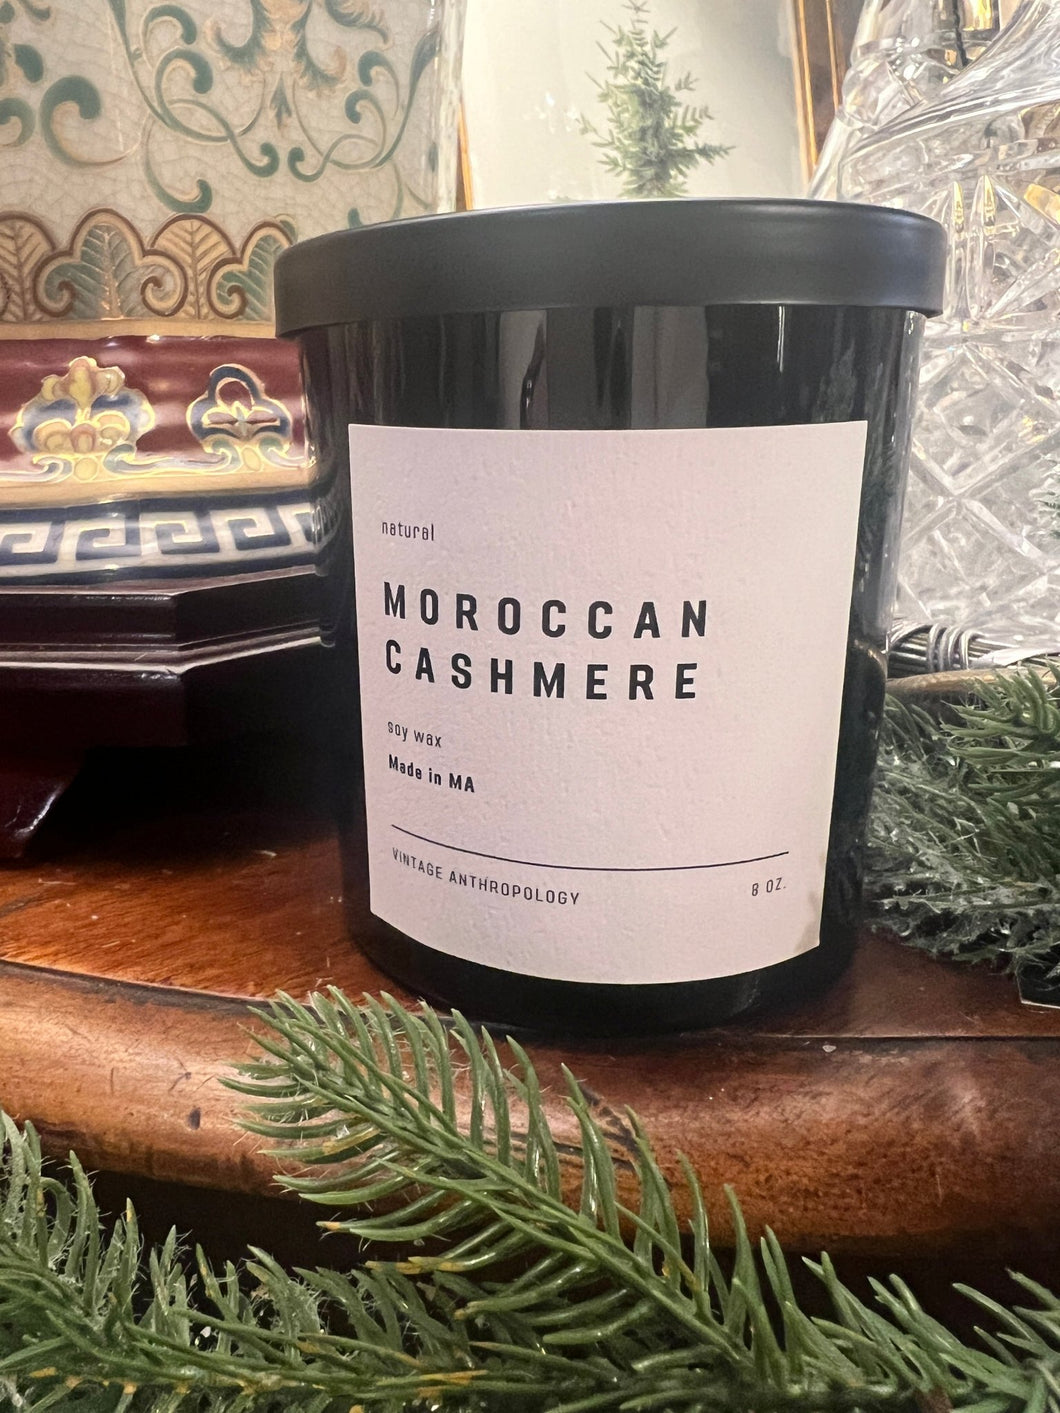 Soy Candle “Moroccan Cashmere” - Vintage AnthropologyVintage Anthropology